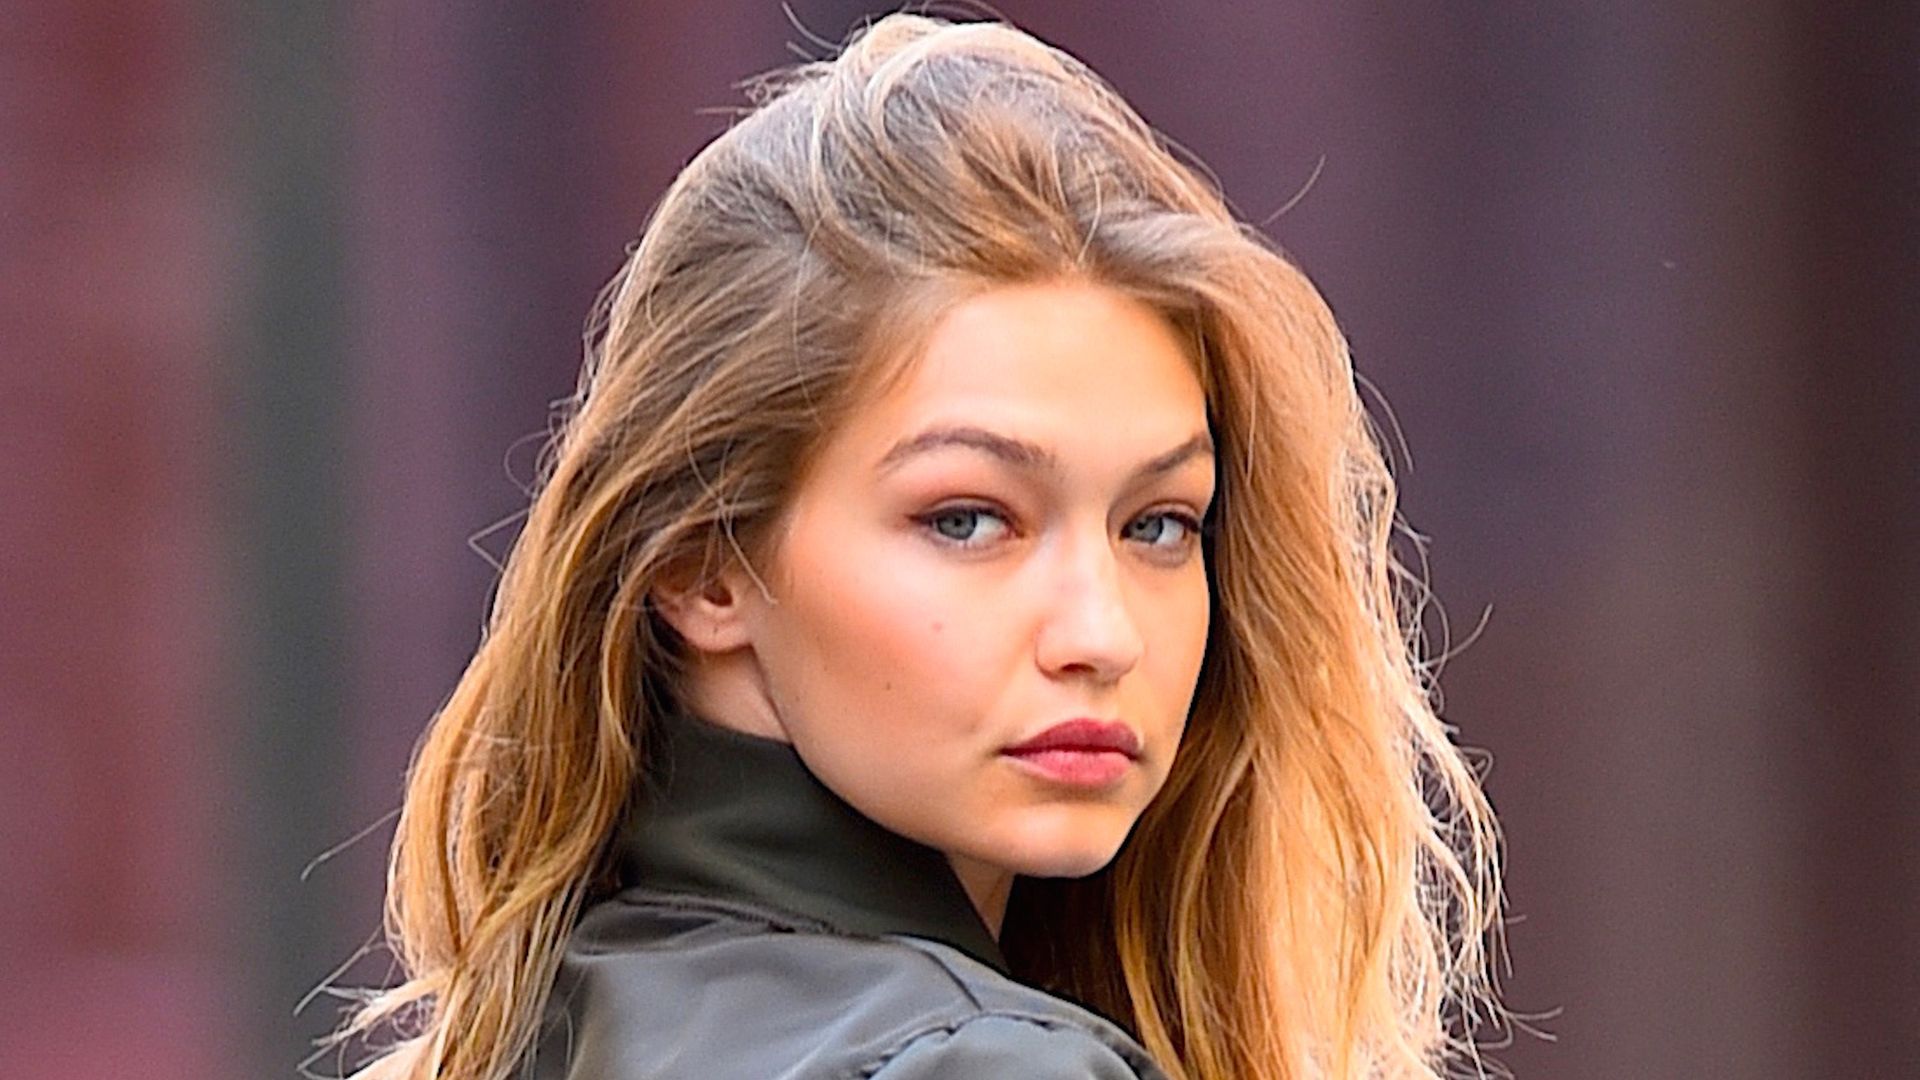 Gigi Hadid's baby daughter steals the show in new family photo